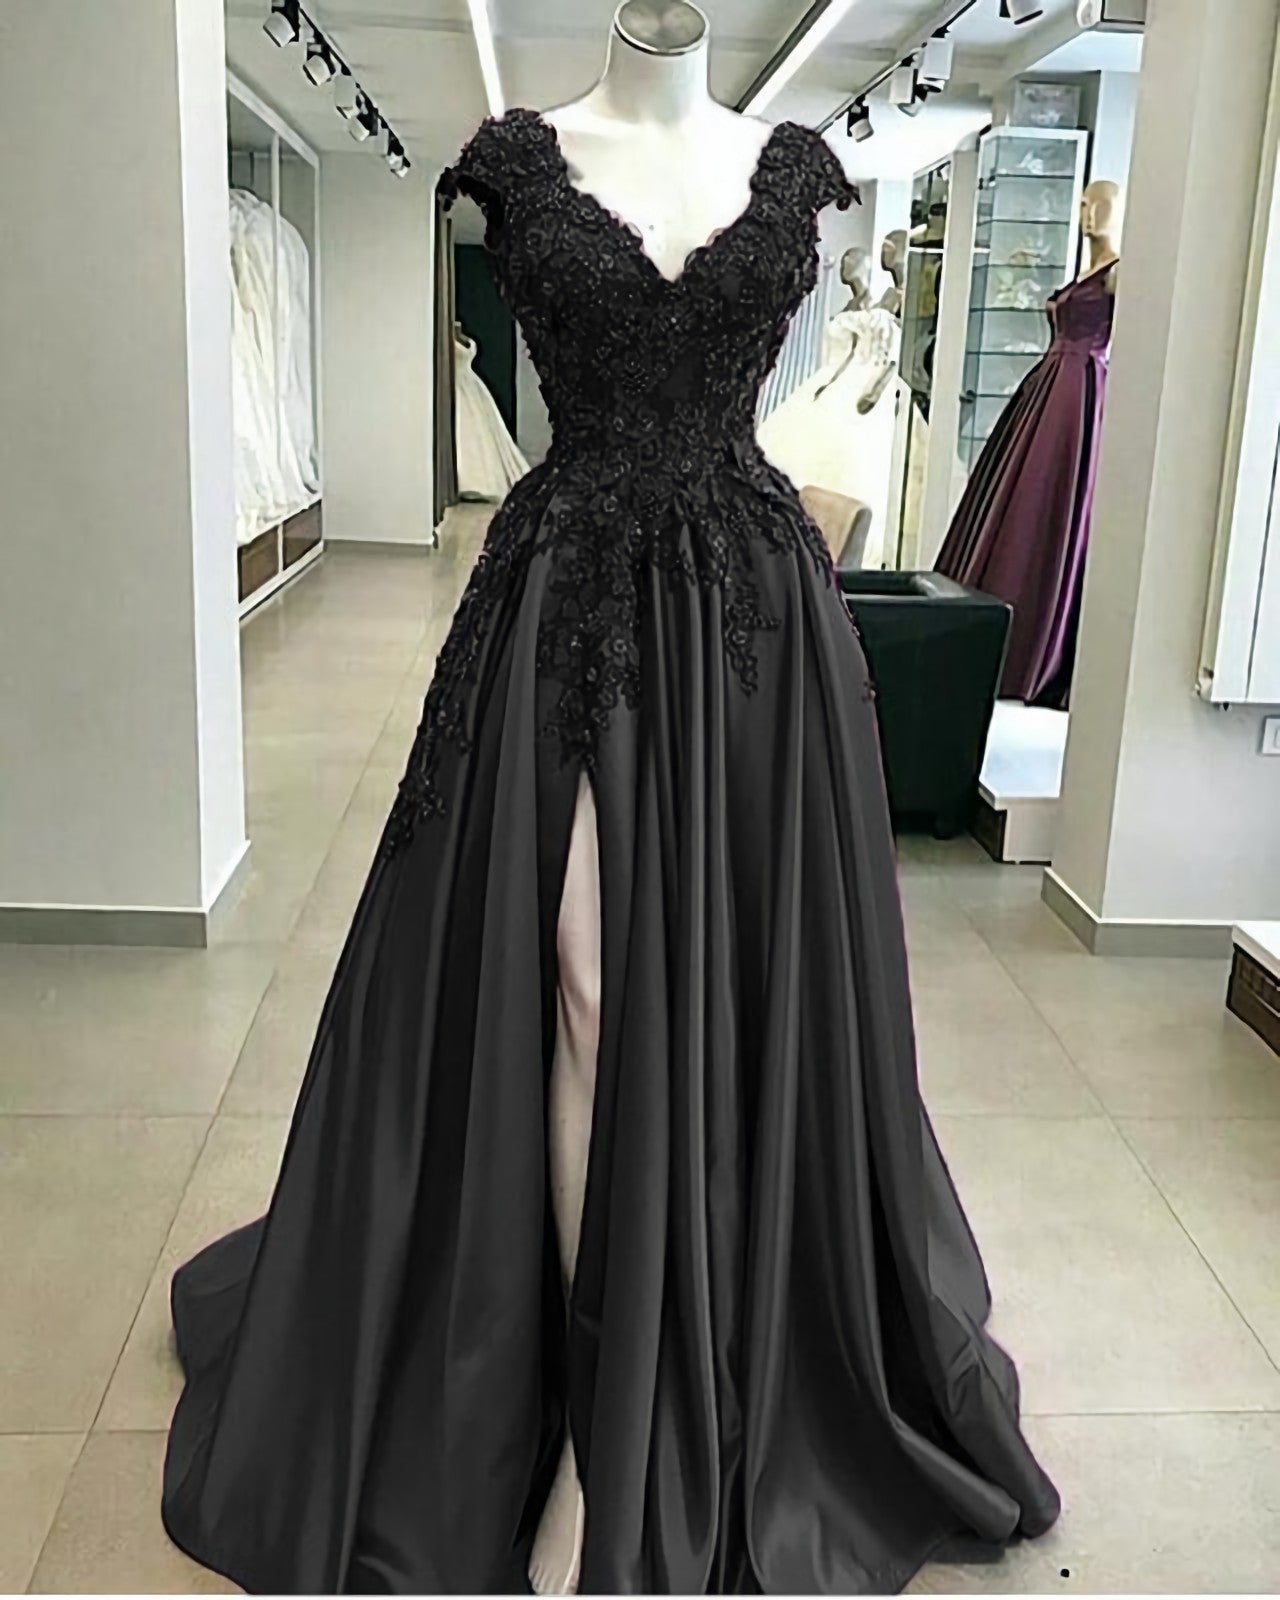 Formal Dresses Ideas, Lace Flowers Beaded Cap Sleeves V Neck Prom Dresses, Split Evening Gowns